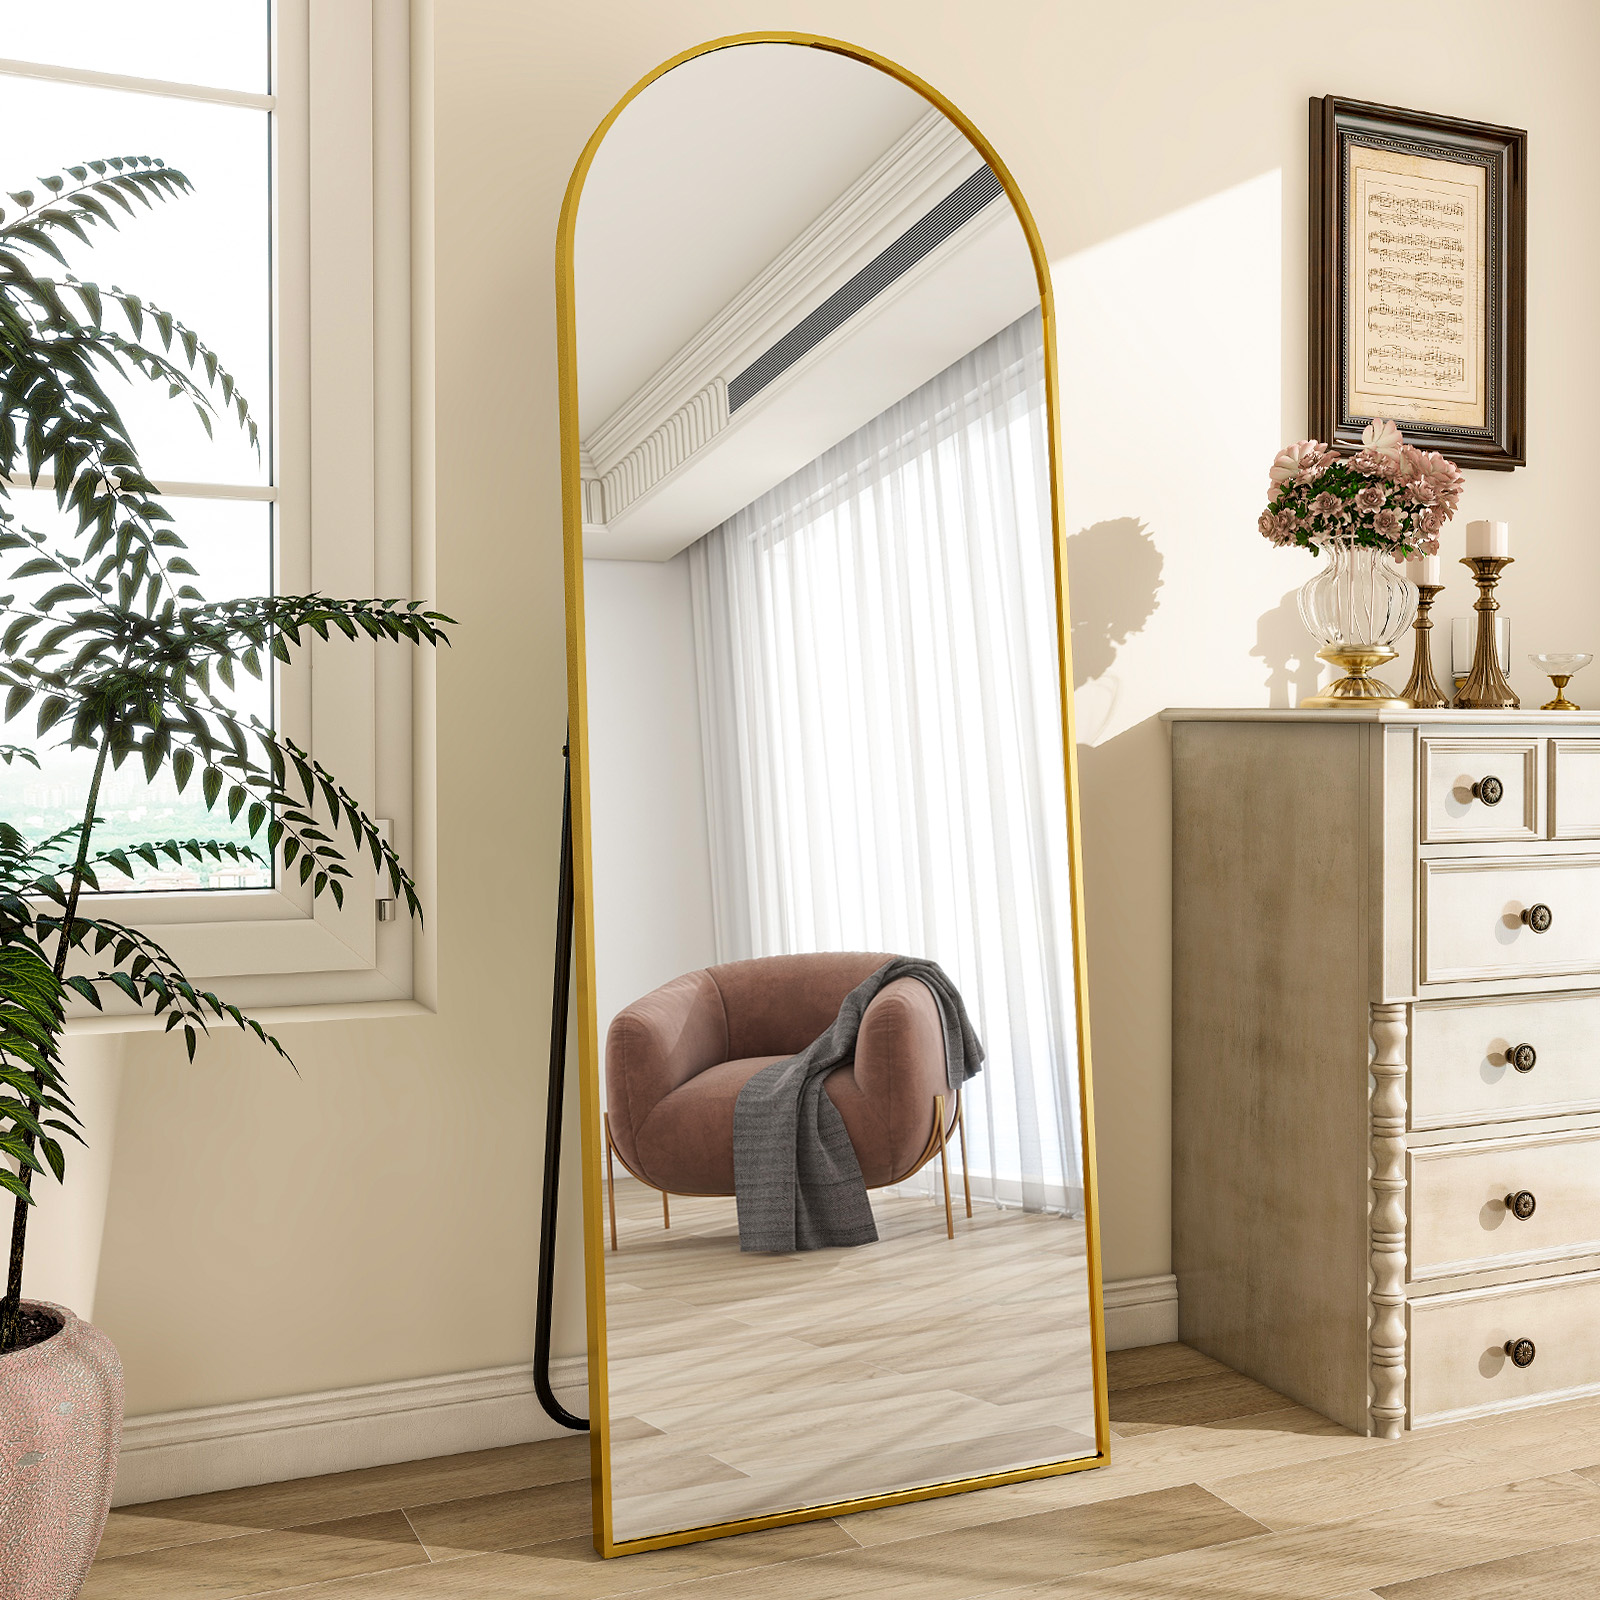 BEAUTYPEAK Arched Full Length Floor Mirror 64"x21.1" Full Body Standing Mirror,Gold - image 5 of 14